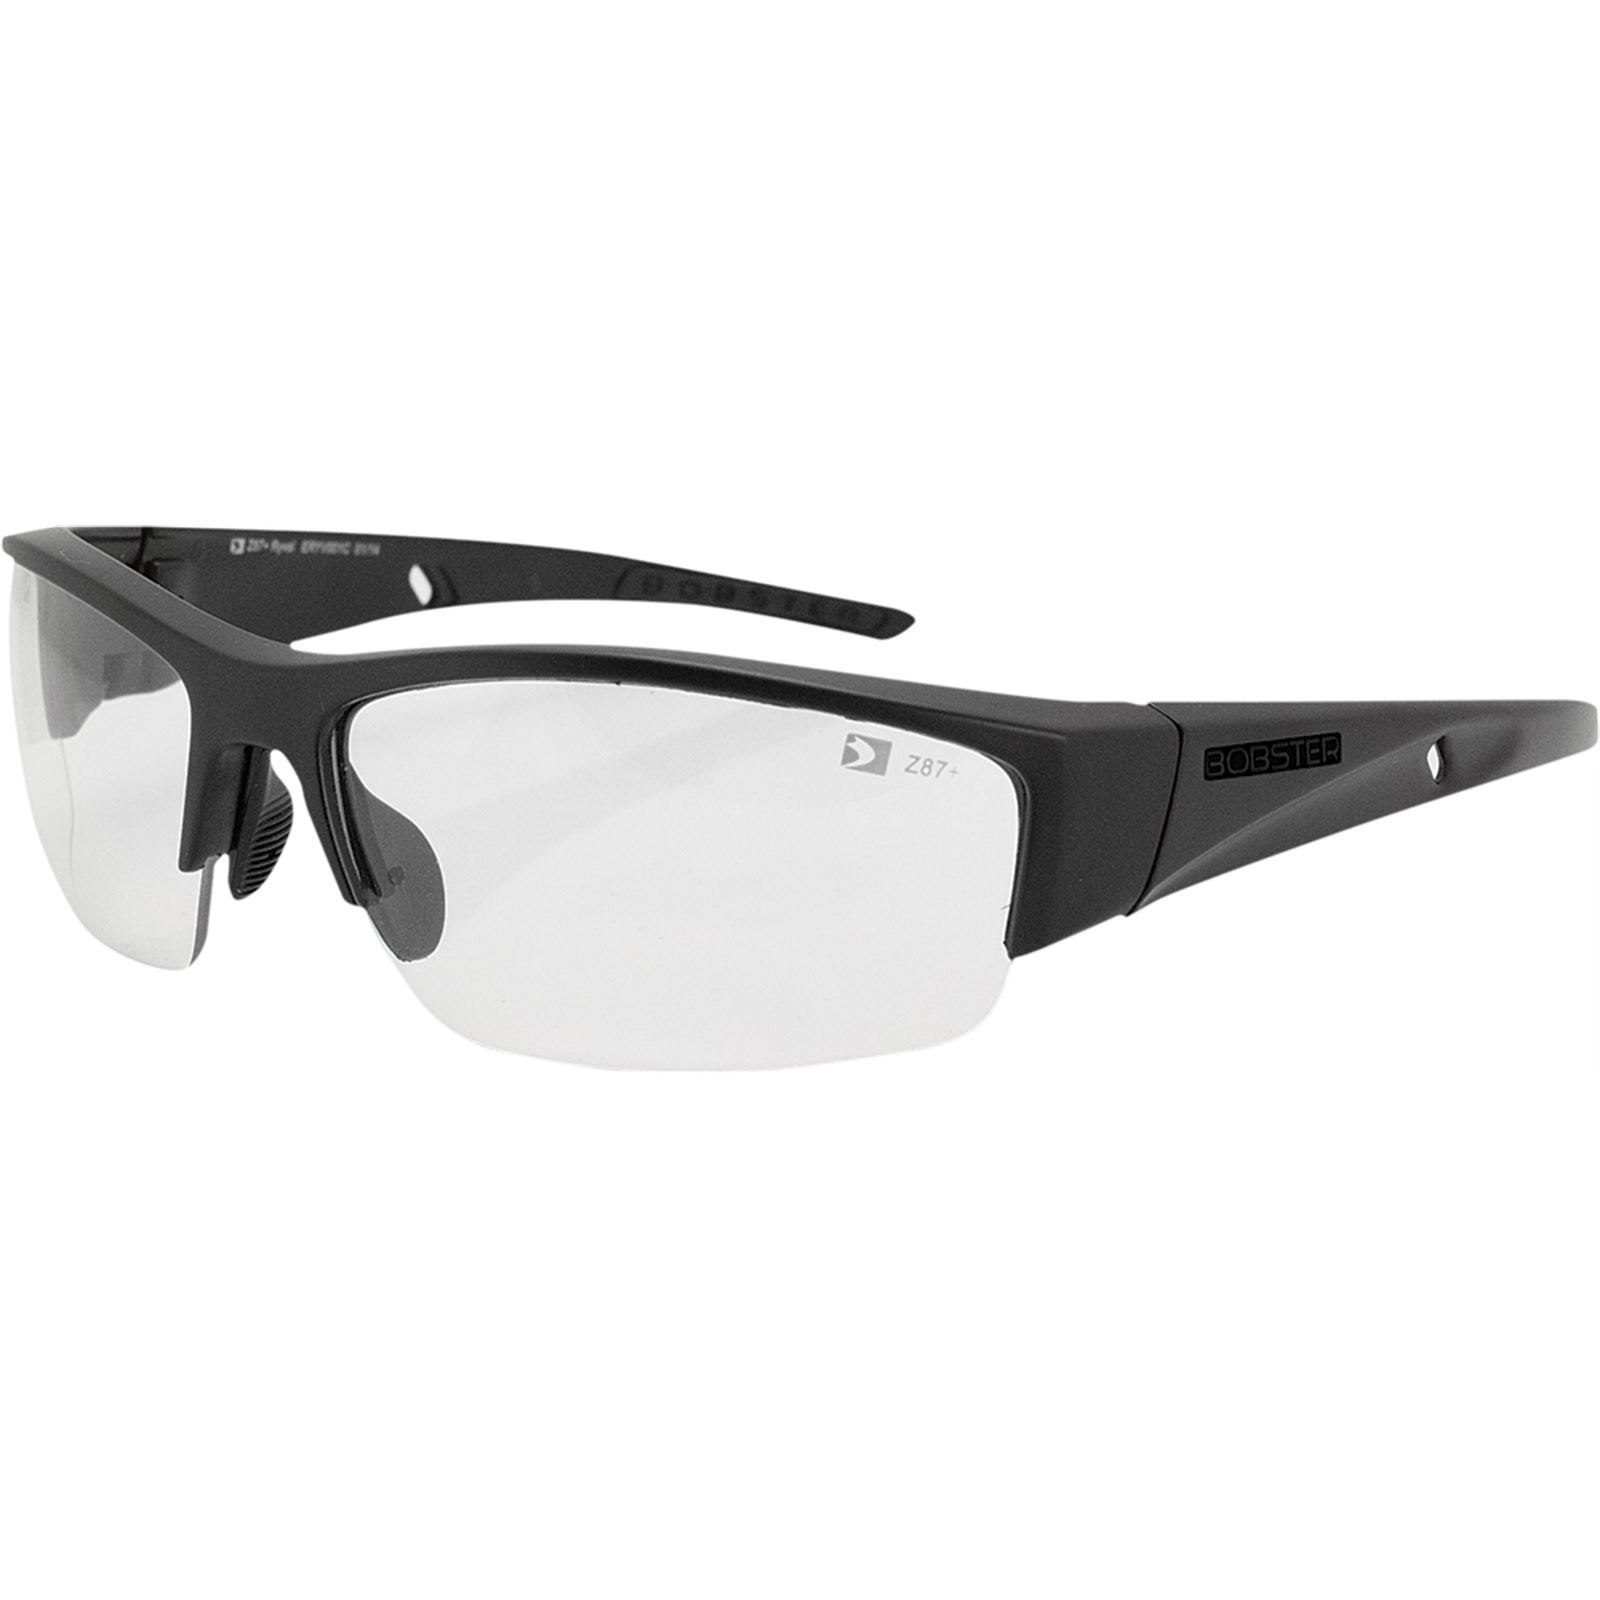 Bobster Ryval 2 Sunglasses - Clear Lens